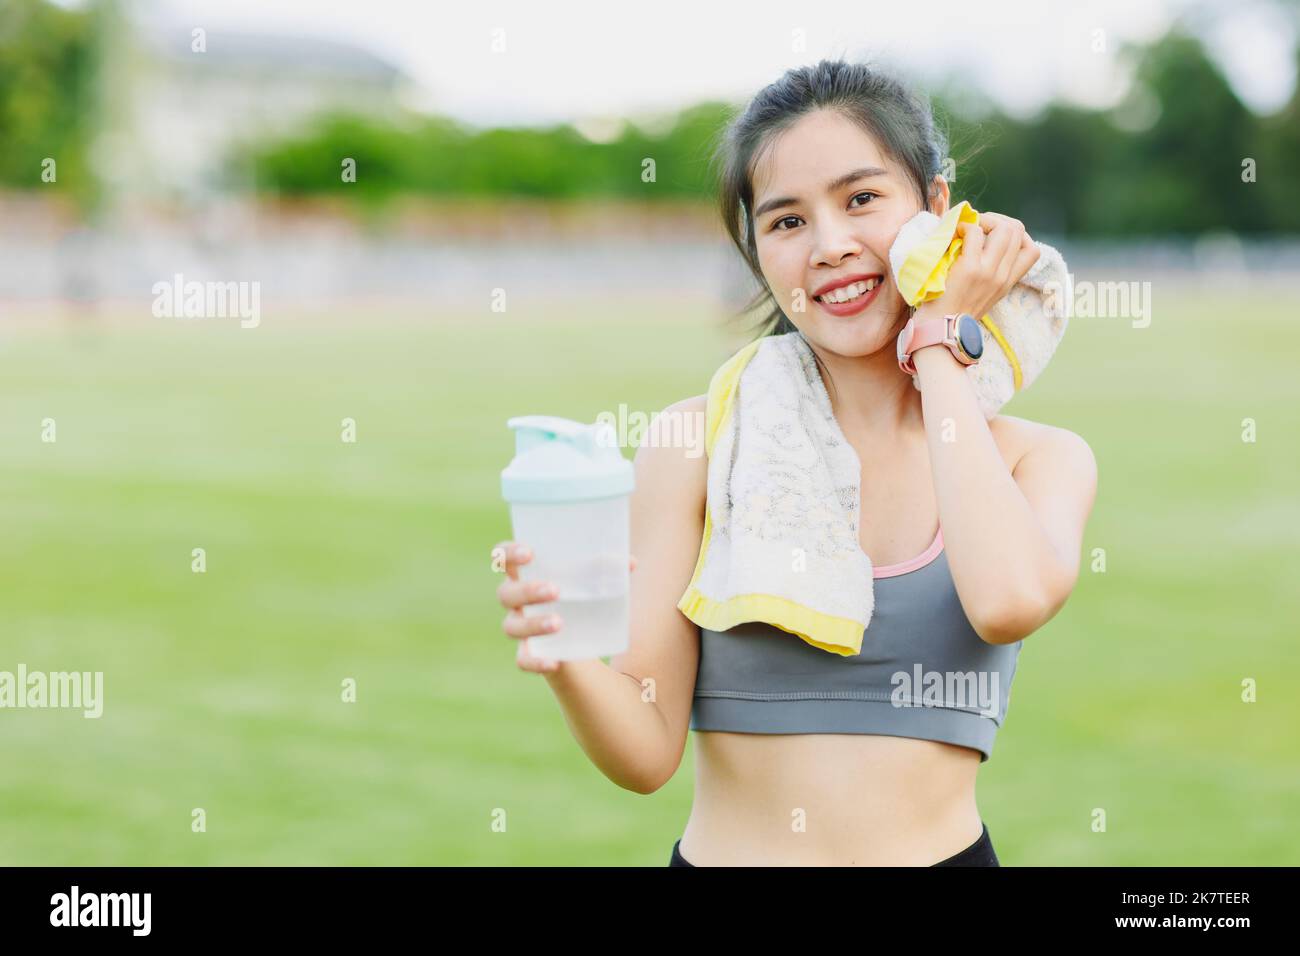 sport teen girl relax smile drinking water wipe sweat finish exercise outdoor Stock Photo